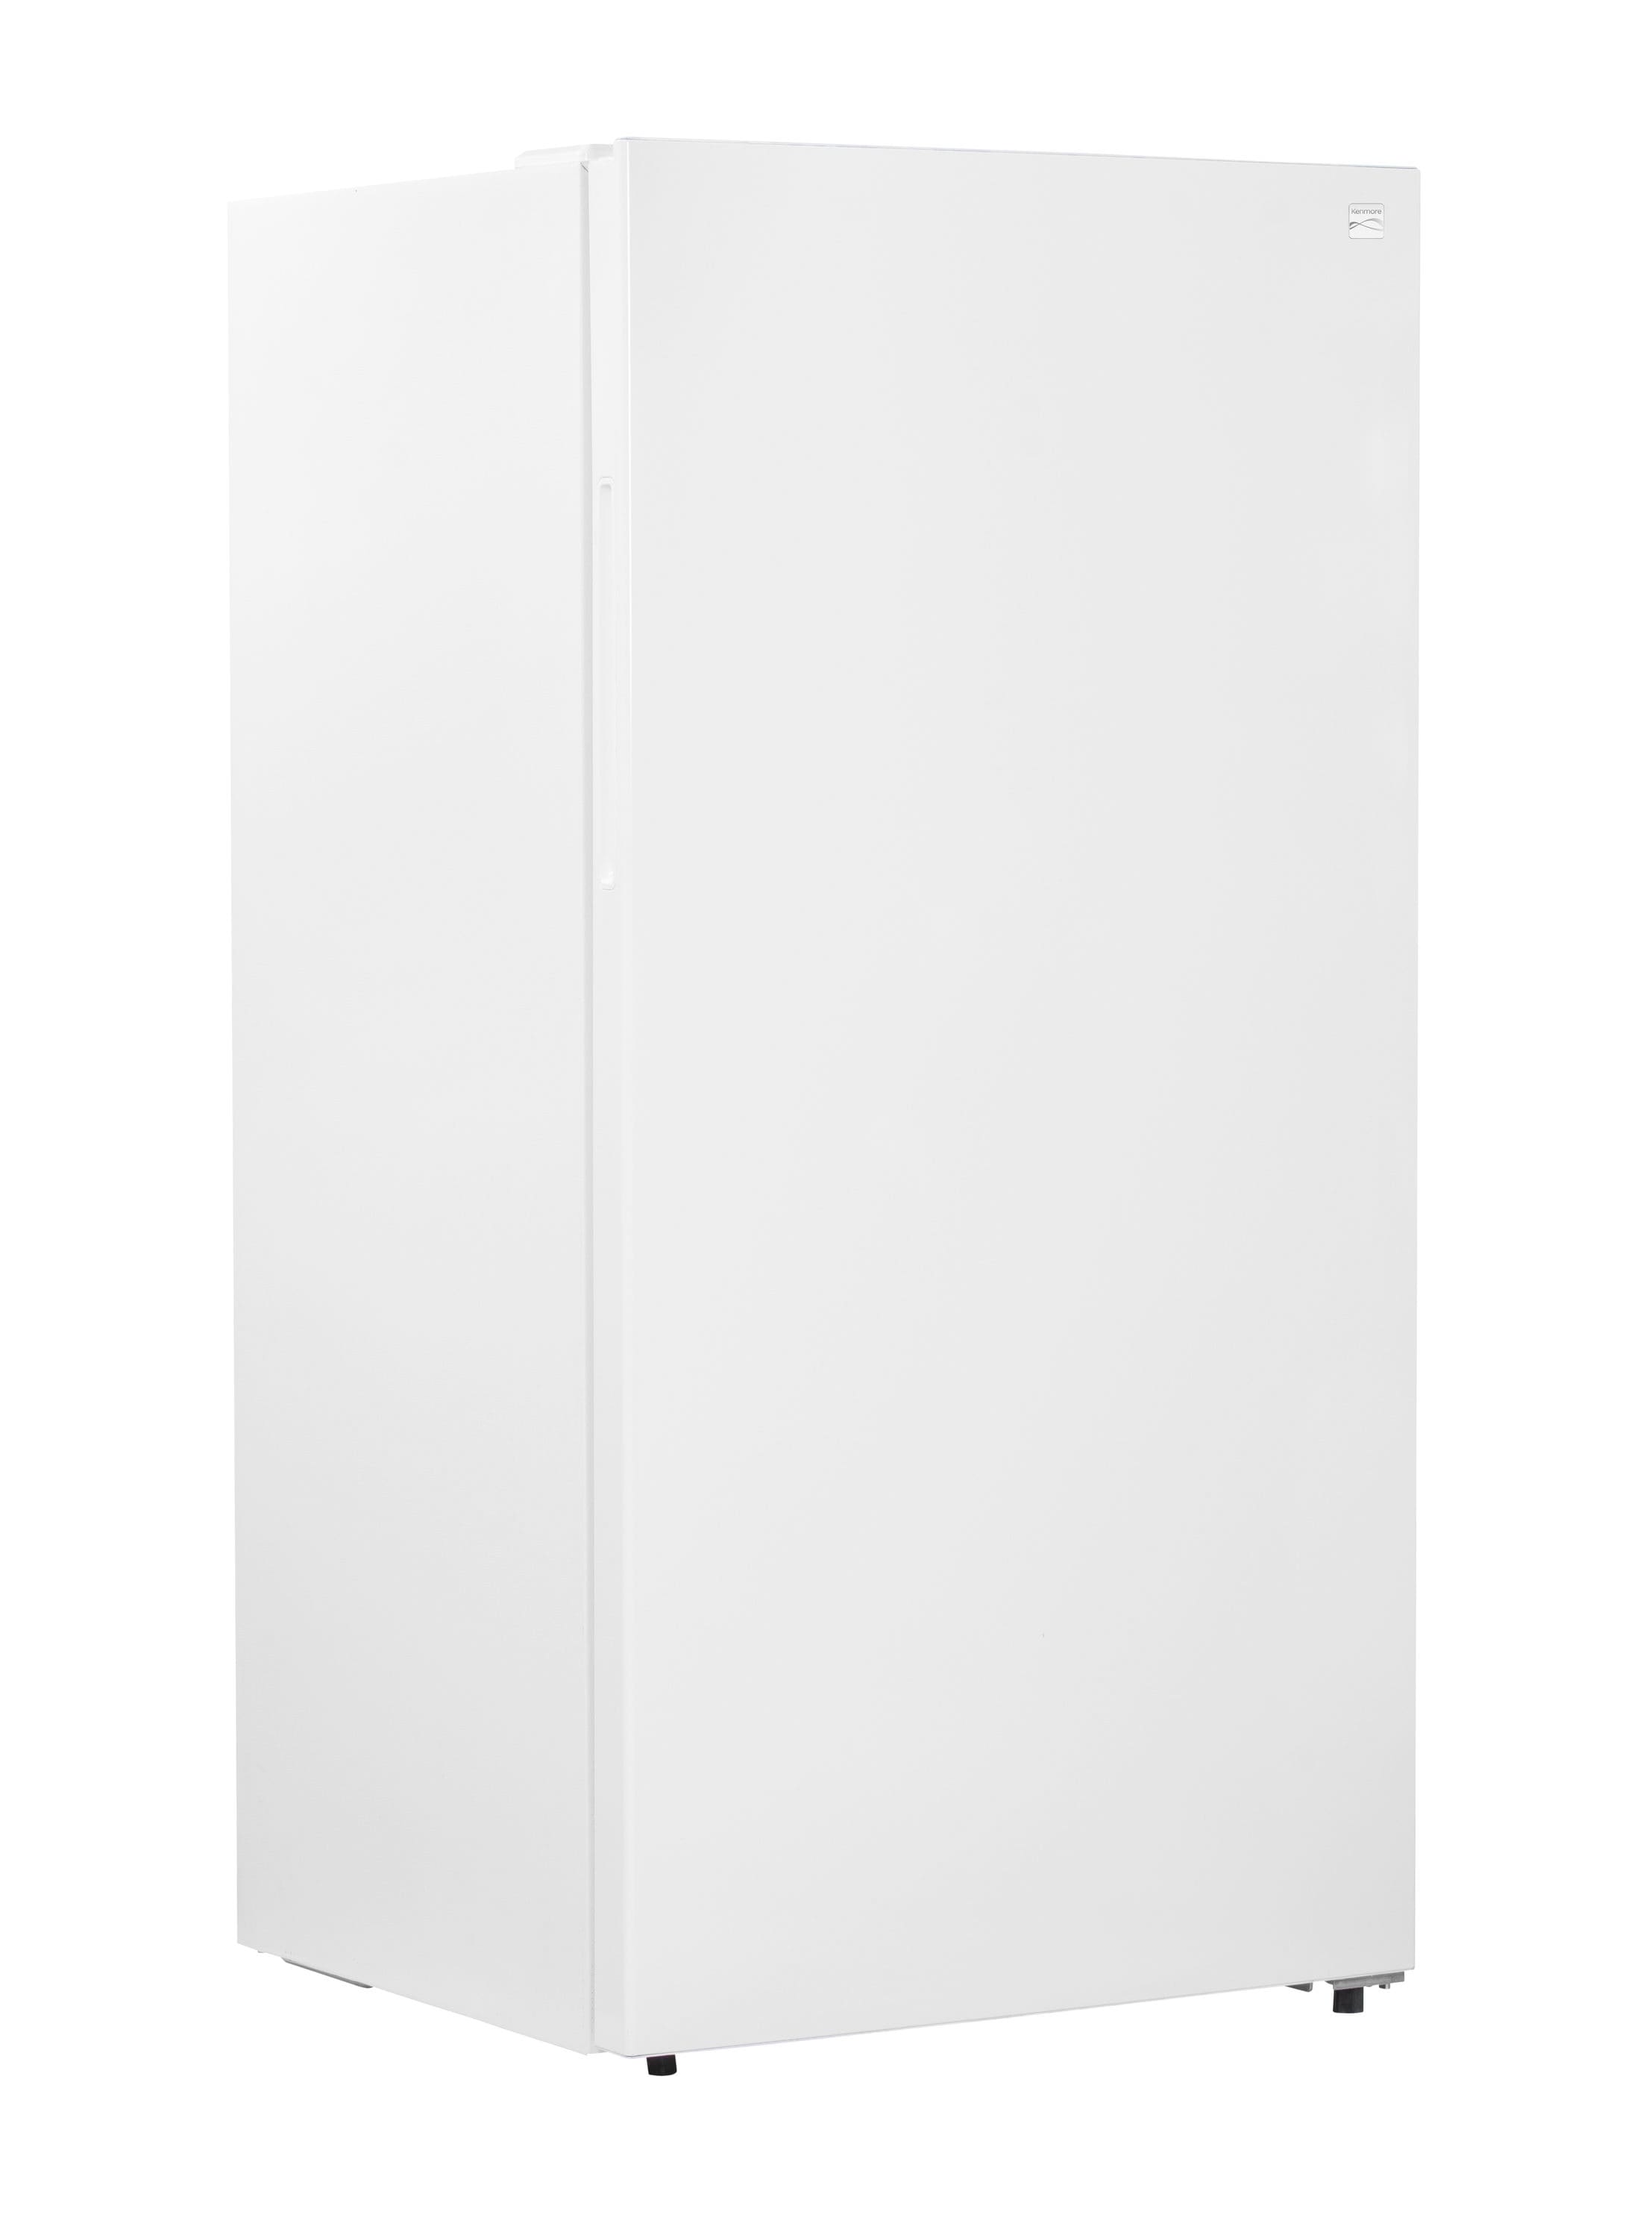 Looking for a refrigerator/freezer solution that will fill this space 64  wide, 79 or 80 tall (uncertain). These units are Kenmore Pro side by side  separate freezer and fridge with dual trim